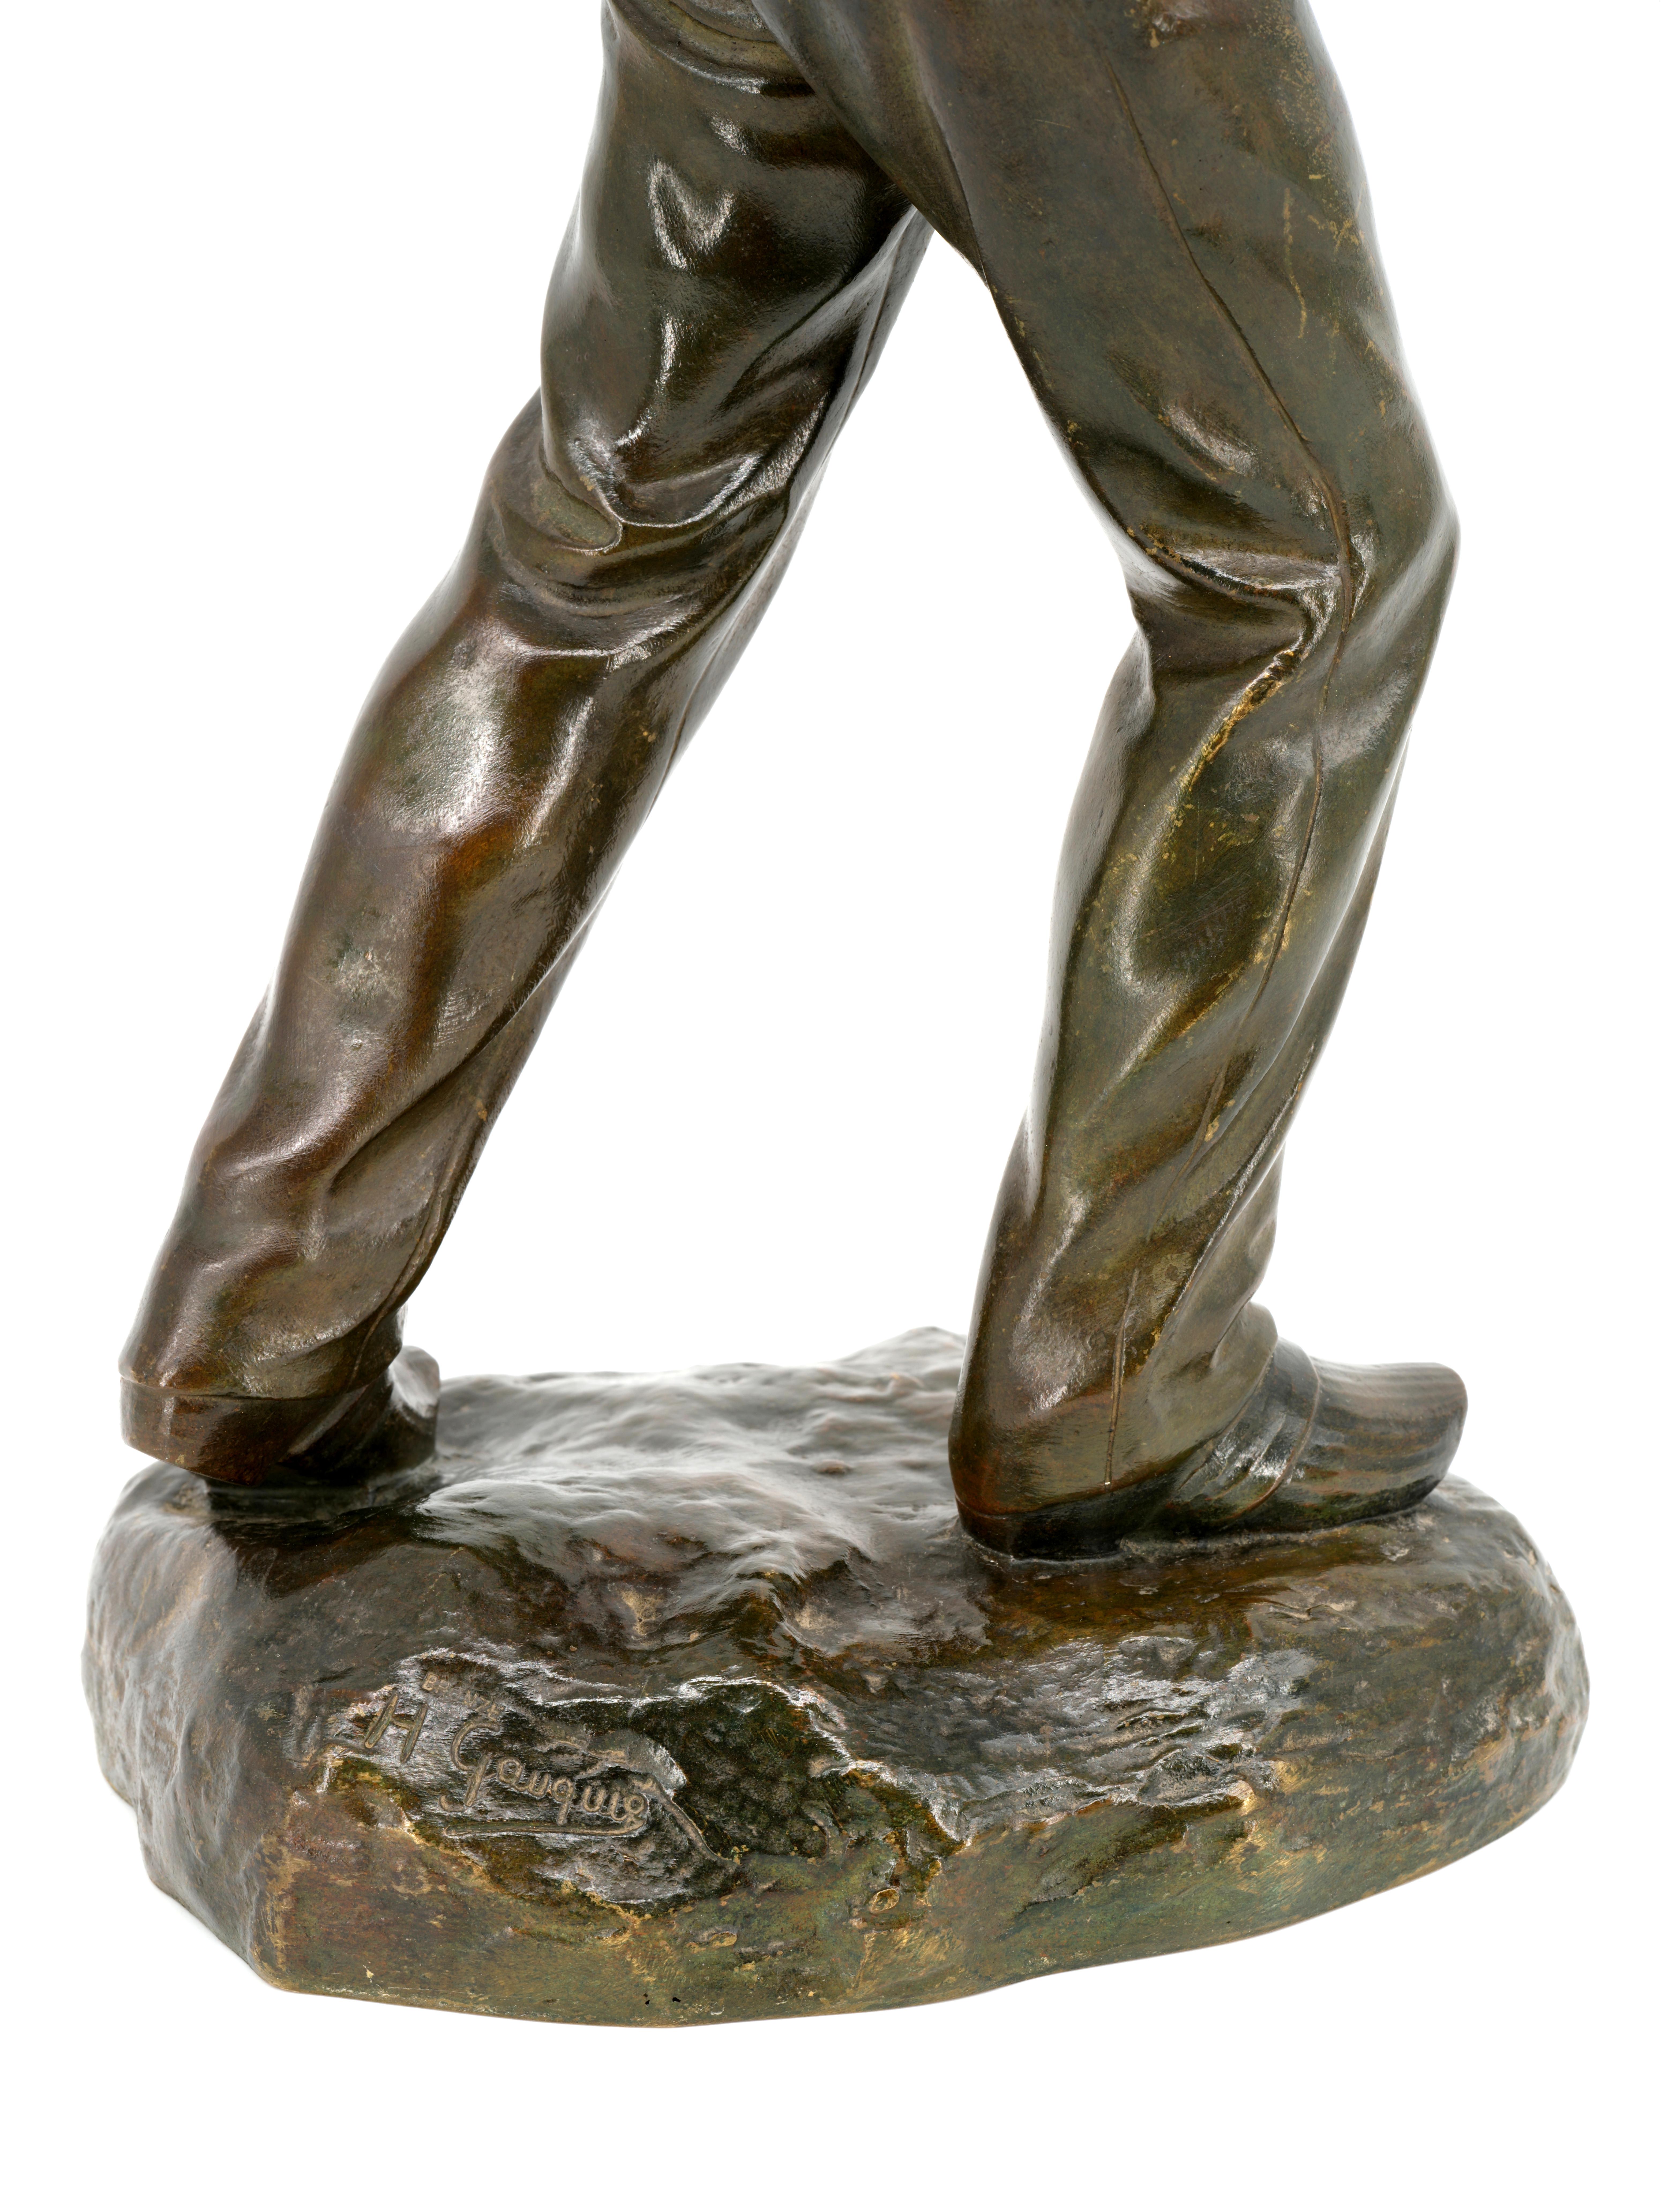 Henri GAUQUIE The Sower French Sculpture, ca.1910 For Sale 4